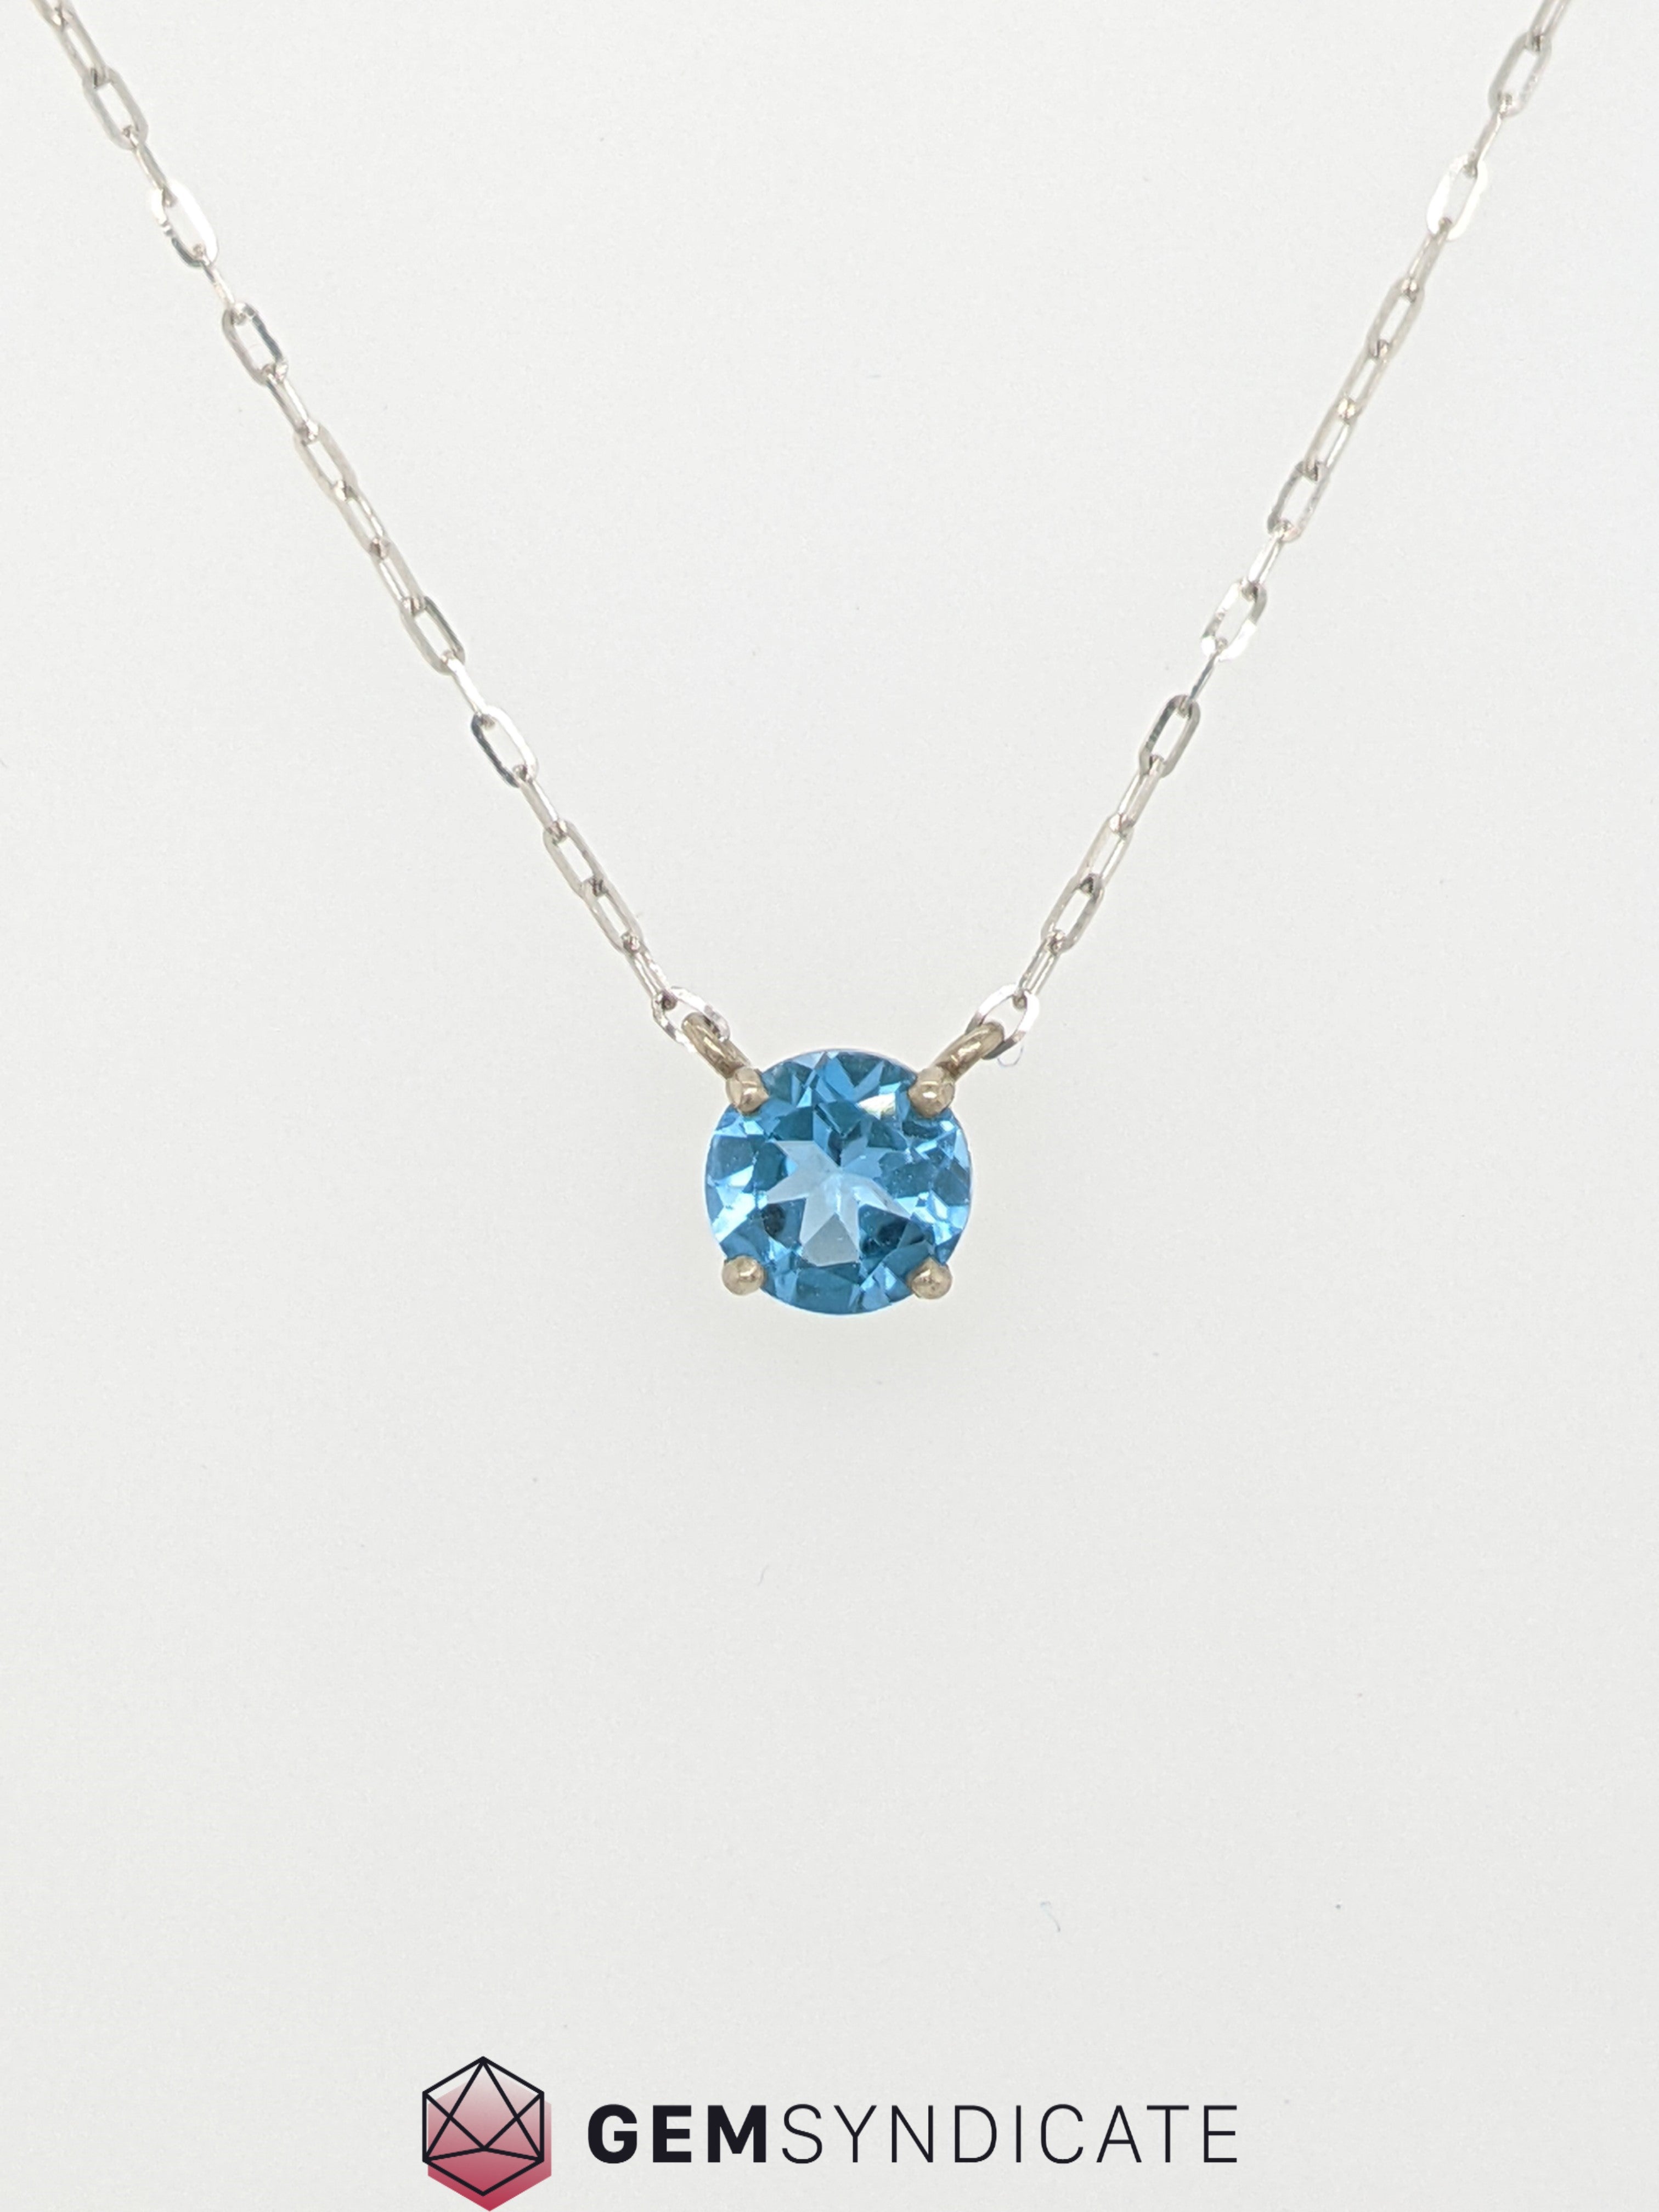 Magnificent Blue Topaz Solitaire Necklace in 14k White Gold